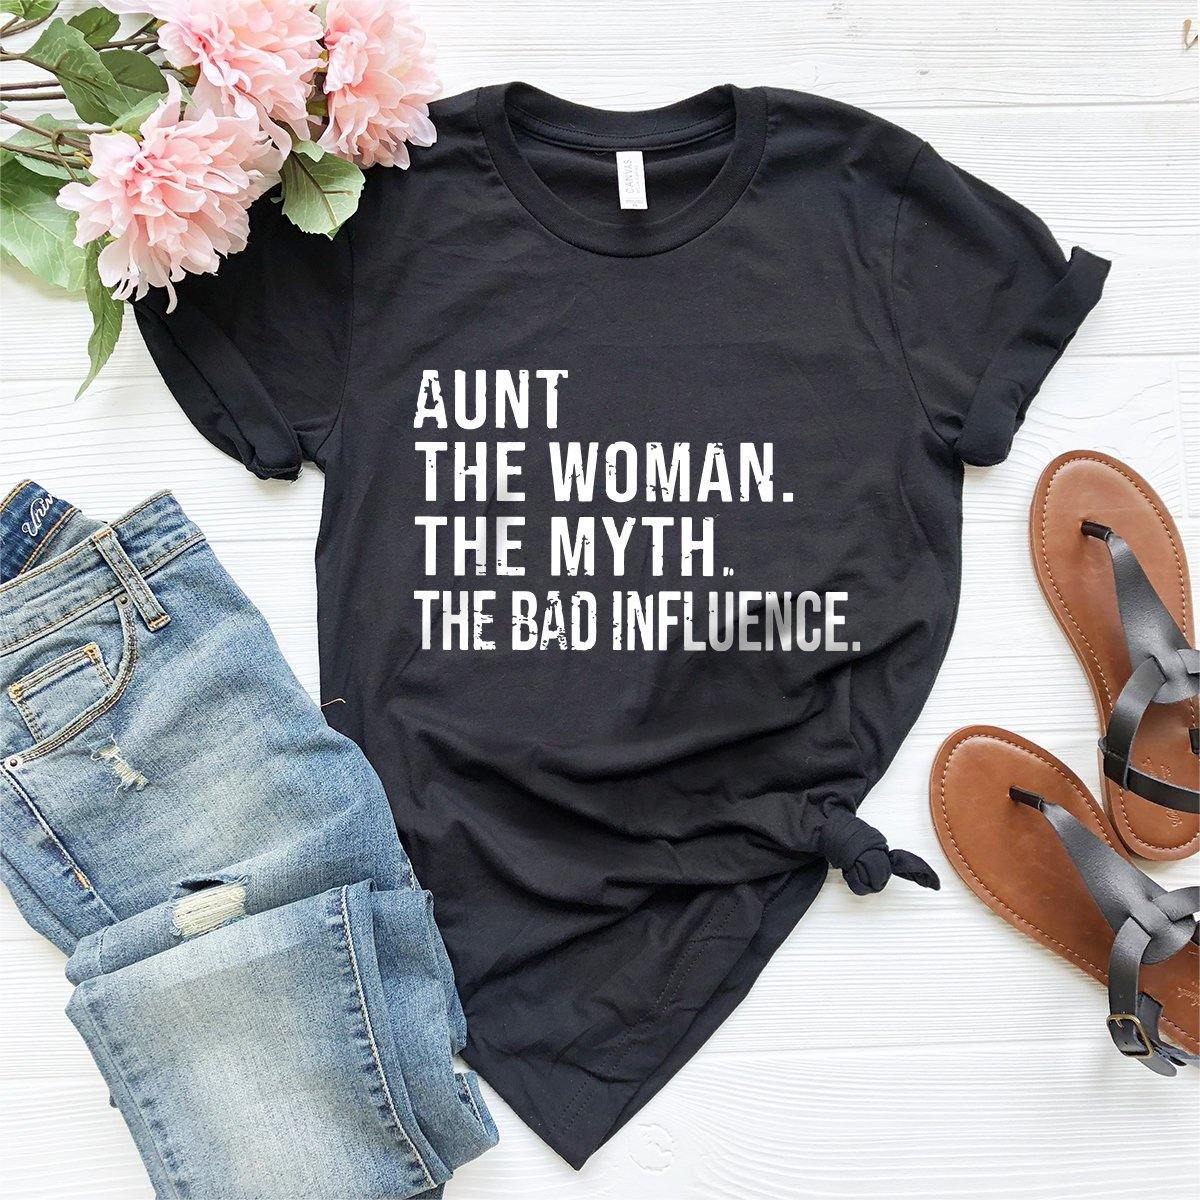 Funny Aunt T-Shirt, Aunt T shirt, Best Aunt Ever Tee, Auntie Tee, Aunt Gift, Gift For Aunt, Aunt The Women The Myth The Bad Influence Shirt - Fastdeliverytees.com